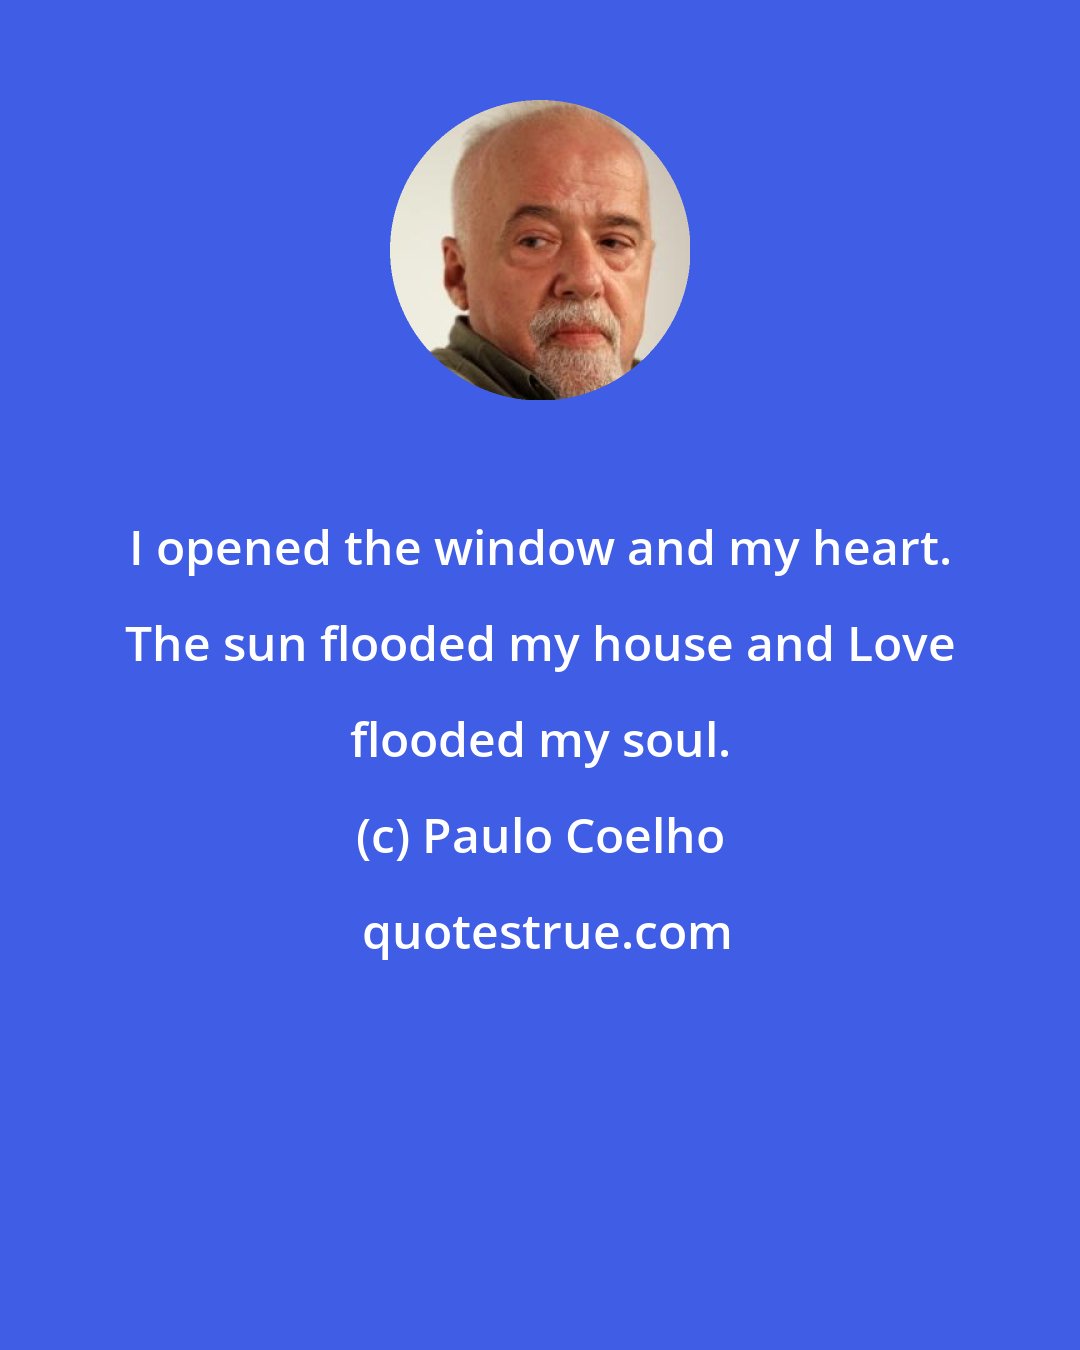 Paulo Coelho: I opened the window and my heart. The sun flooded my house and Love flooded my soul.